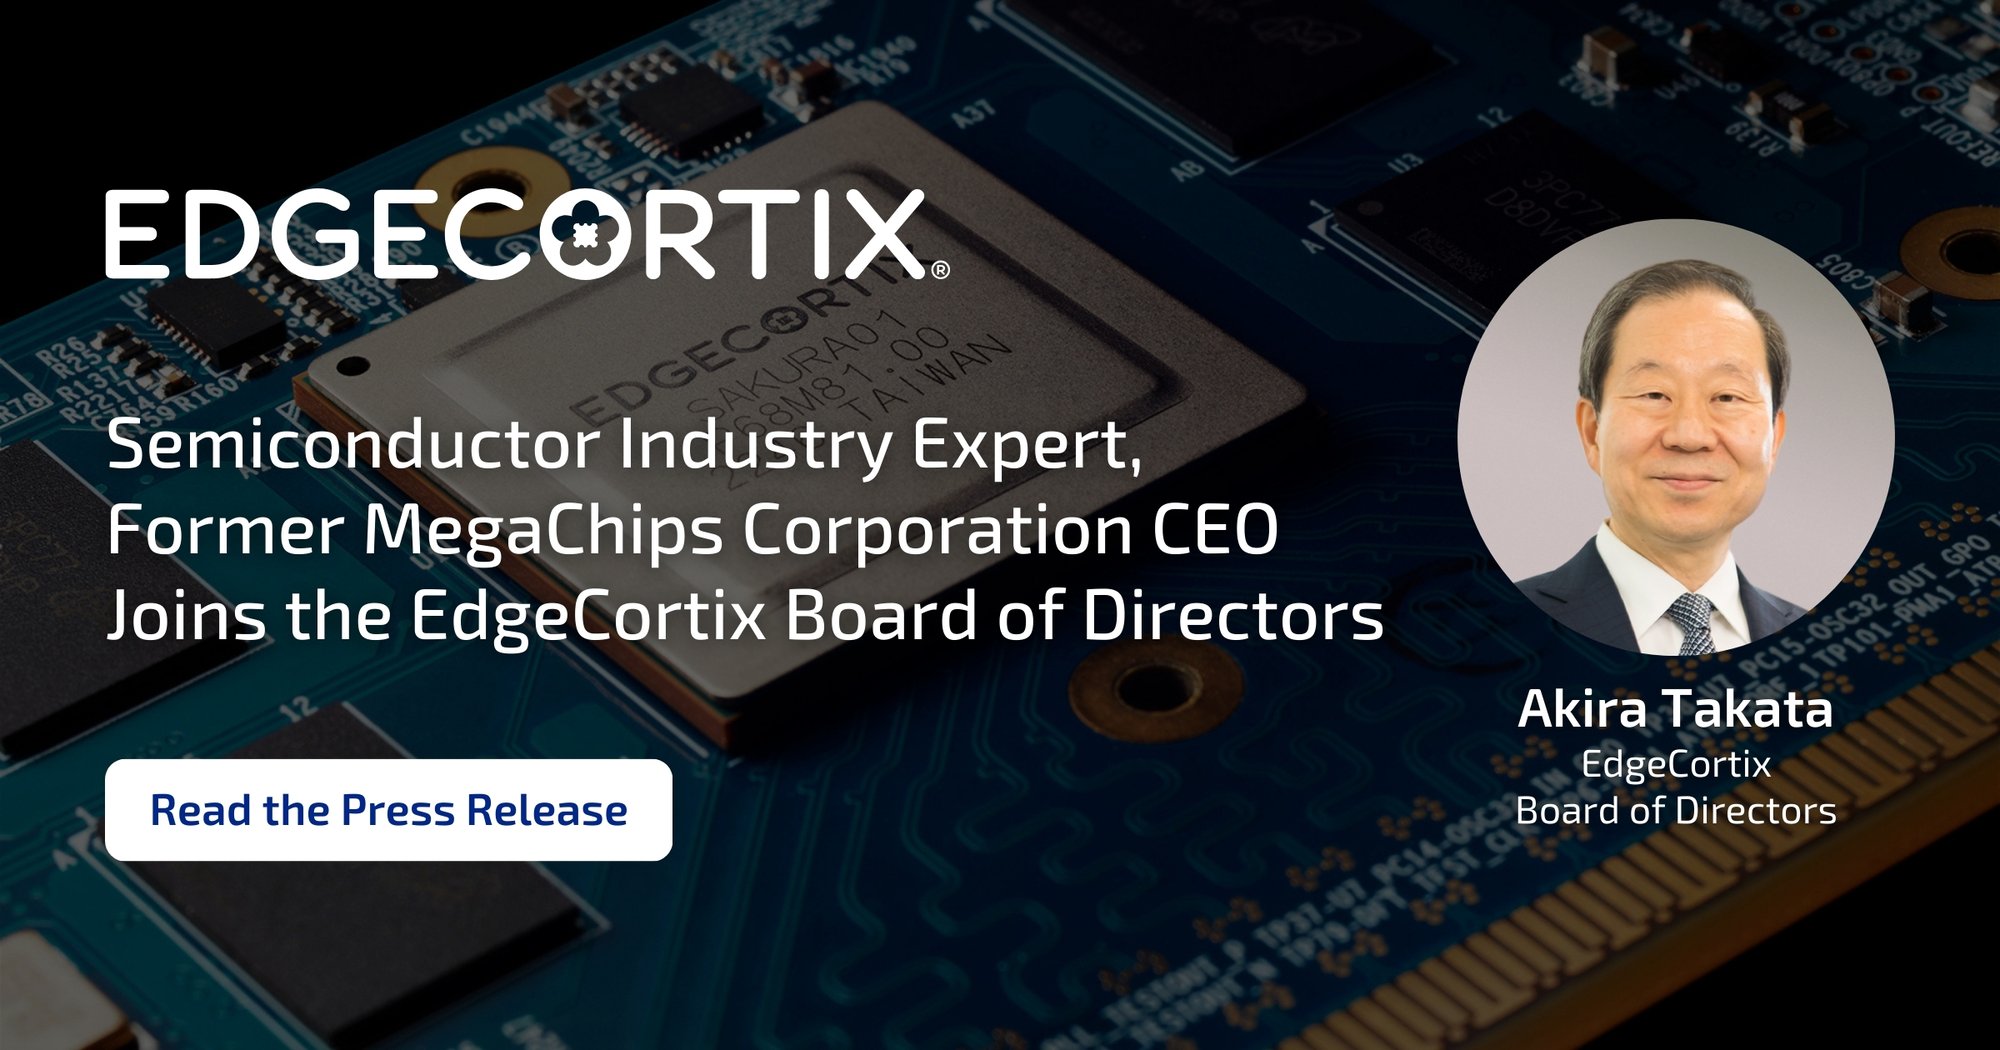 Semiconductor Industry Expert, and Former MegaChips CEO Joins EdgeCortix Board of Directors